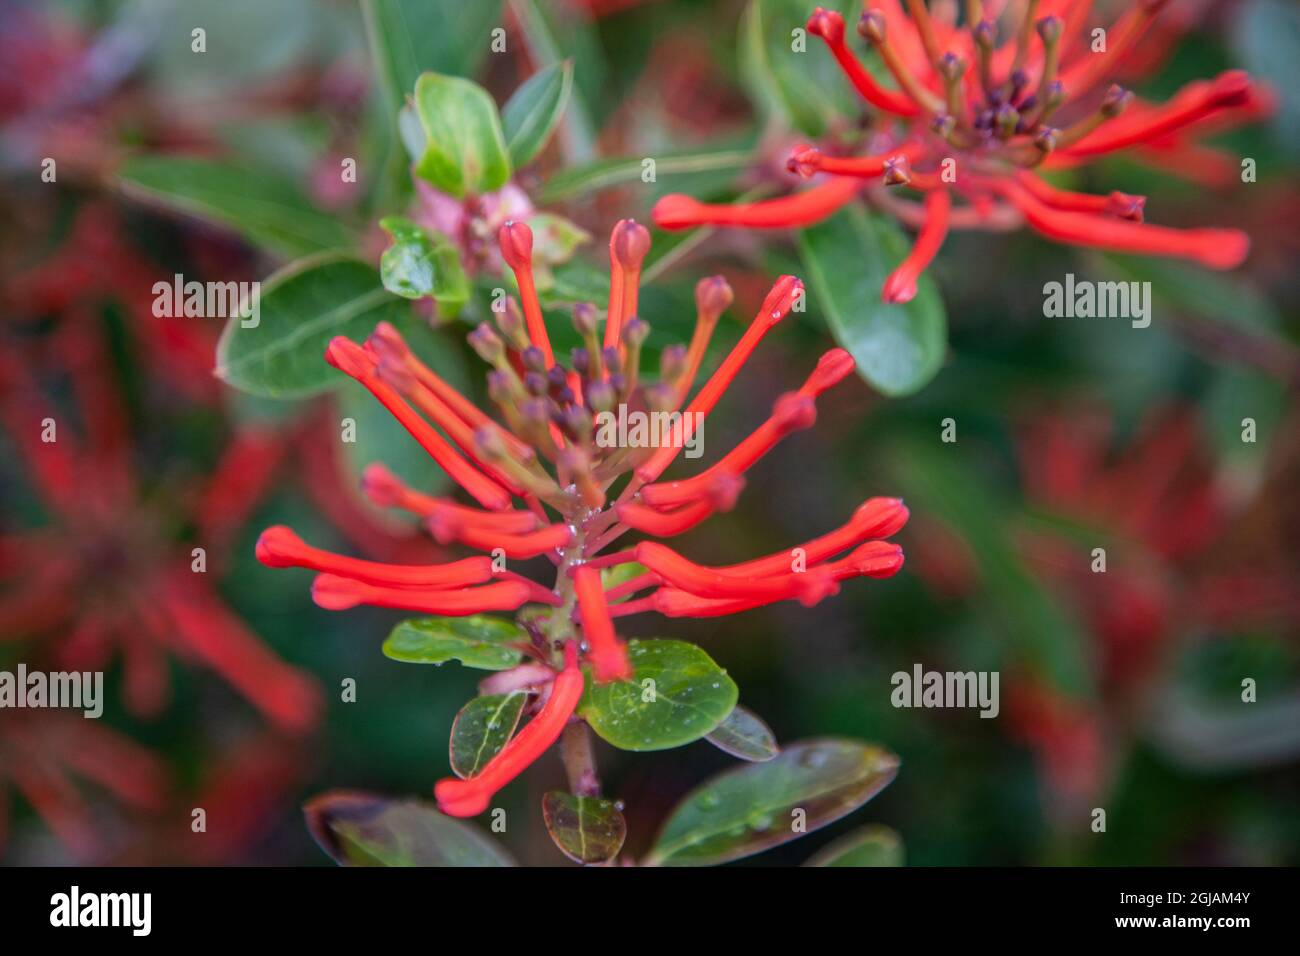 Found in Parc Nacional Torres del Paine , this plant is the highly toxic firebush. Stock Photo